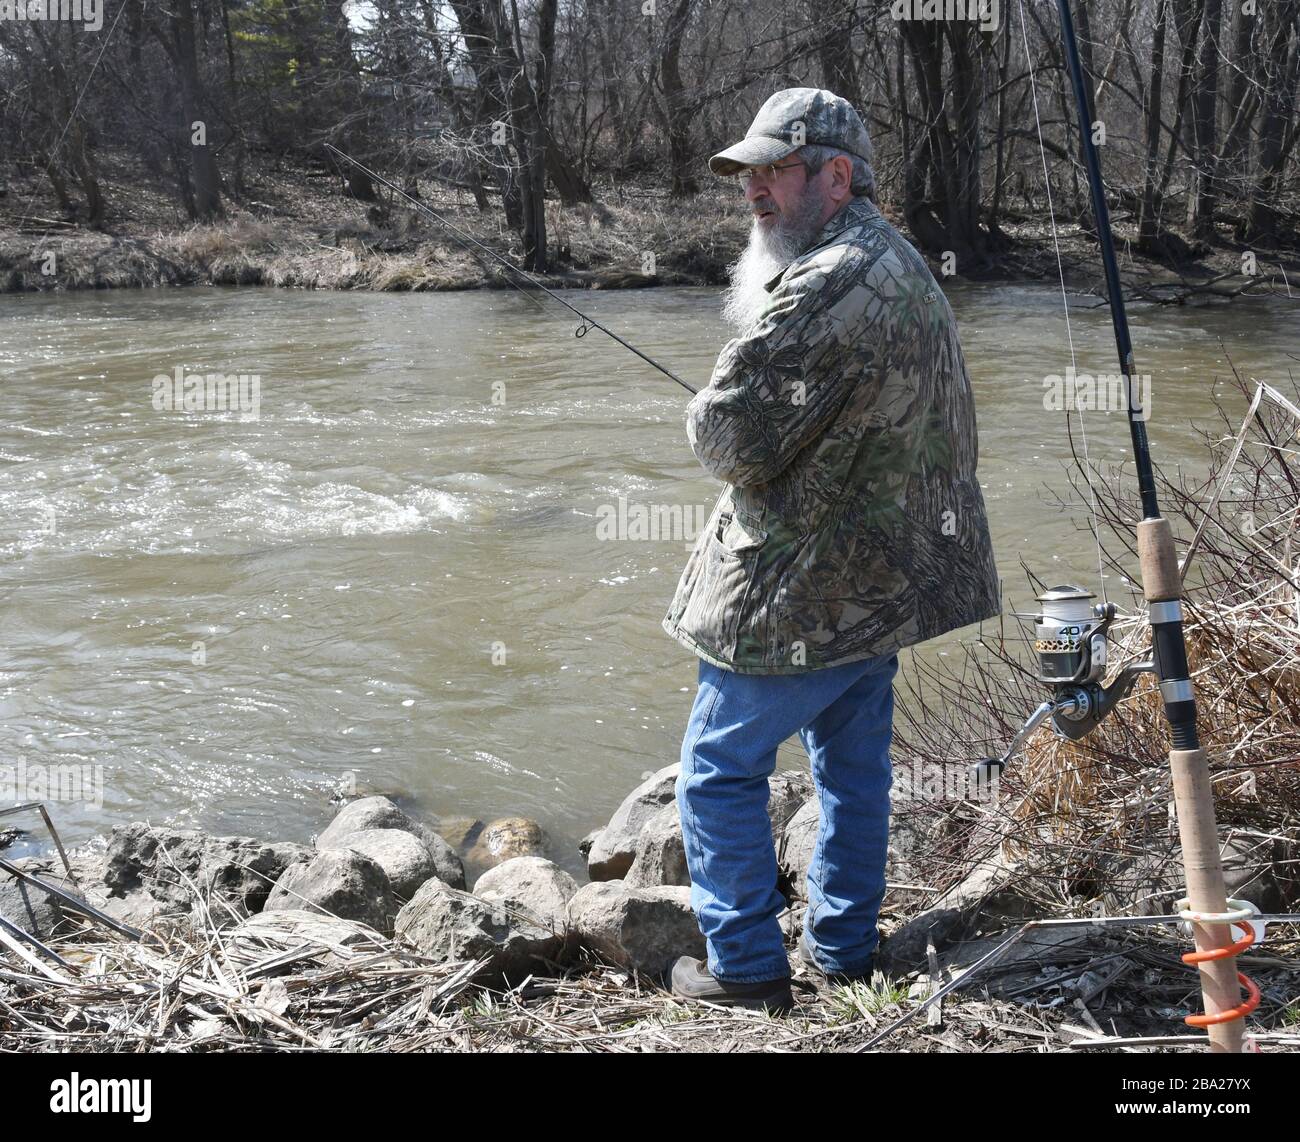 Racine, Wisconsin, USA. 25th Mar, 2020. MIKE DECKER from nearby Sturtevant,  Wisconsin tries his luck fishing in the Root River in Racine, Wisconsin,  and Wednesday March 25, 2020. He alternated between casting